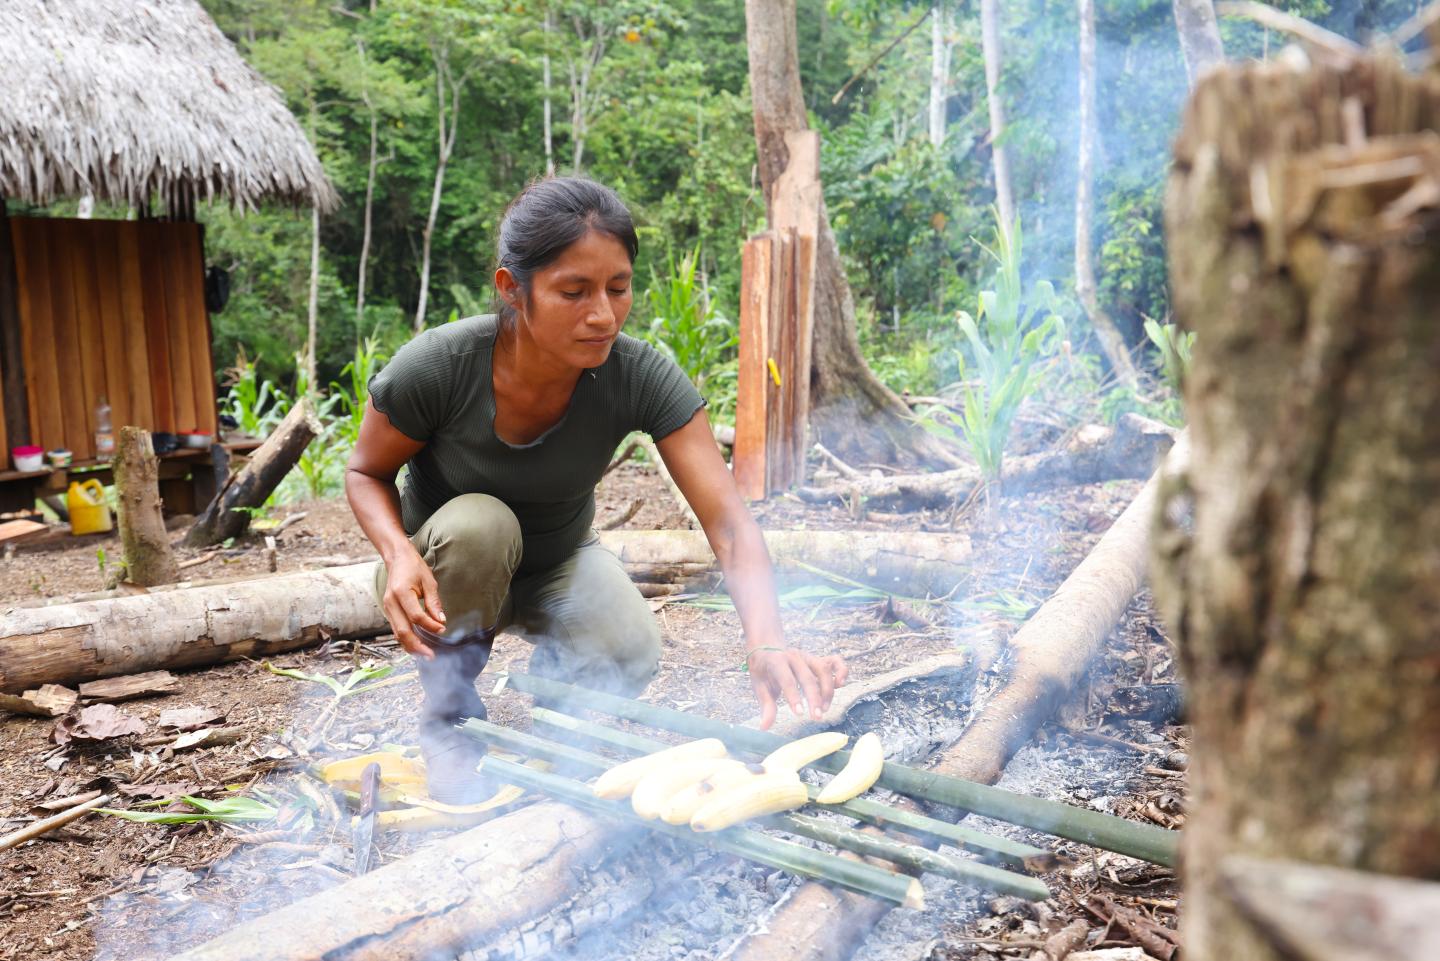 A member of the Shuar people cooking plantains 